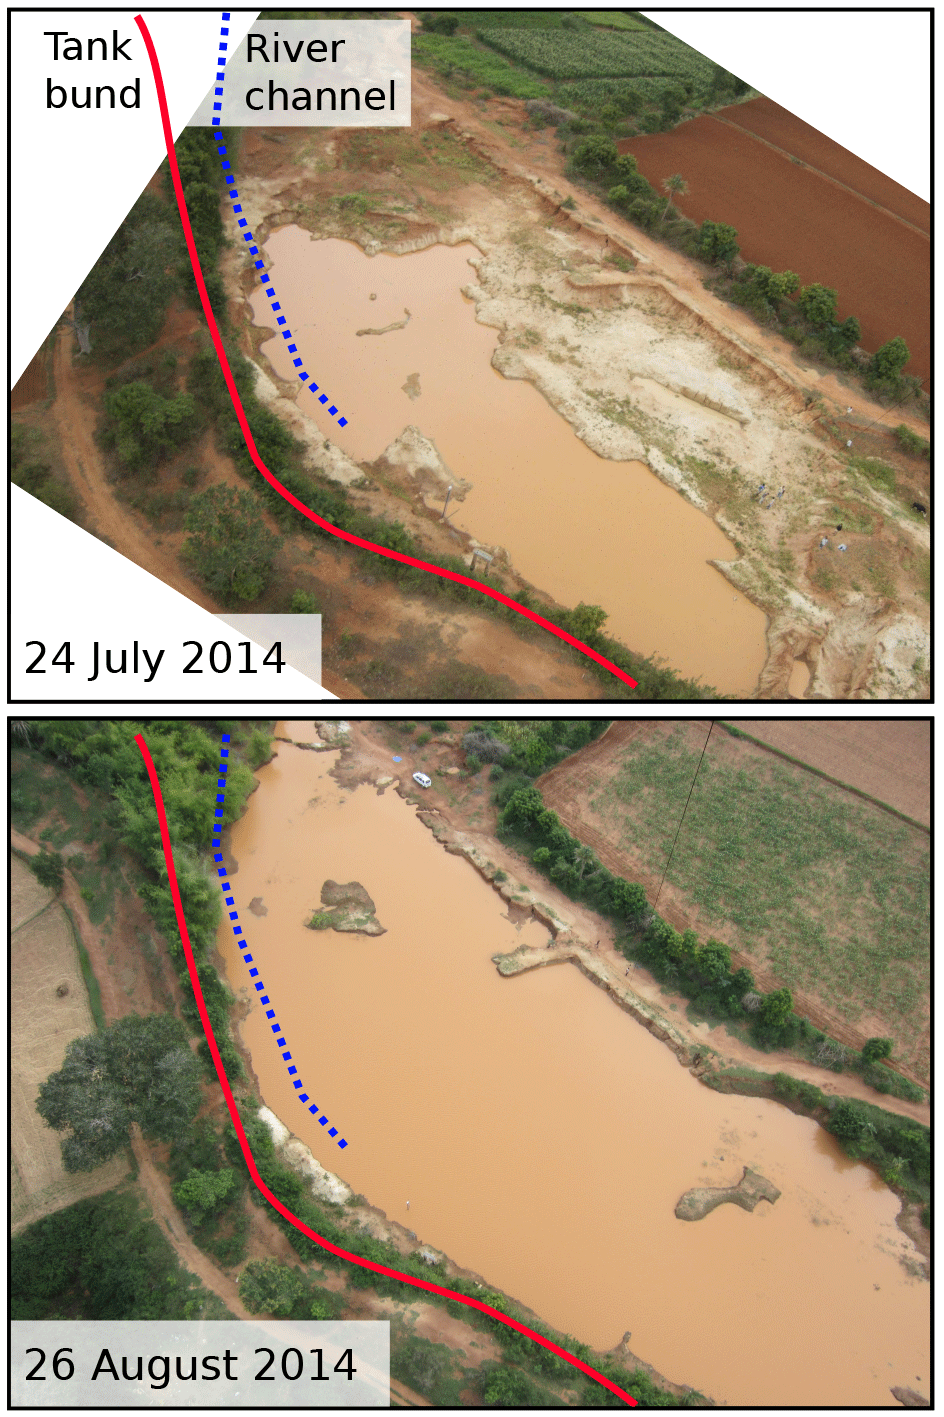 a case study of pollution in river arkavathy